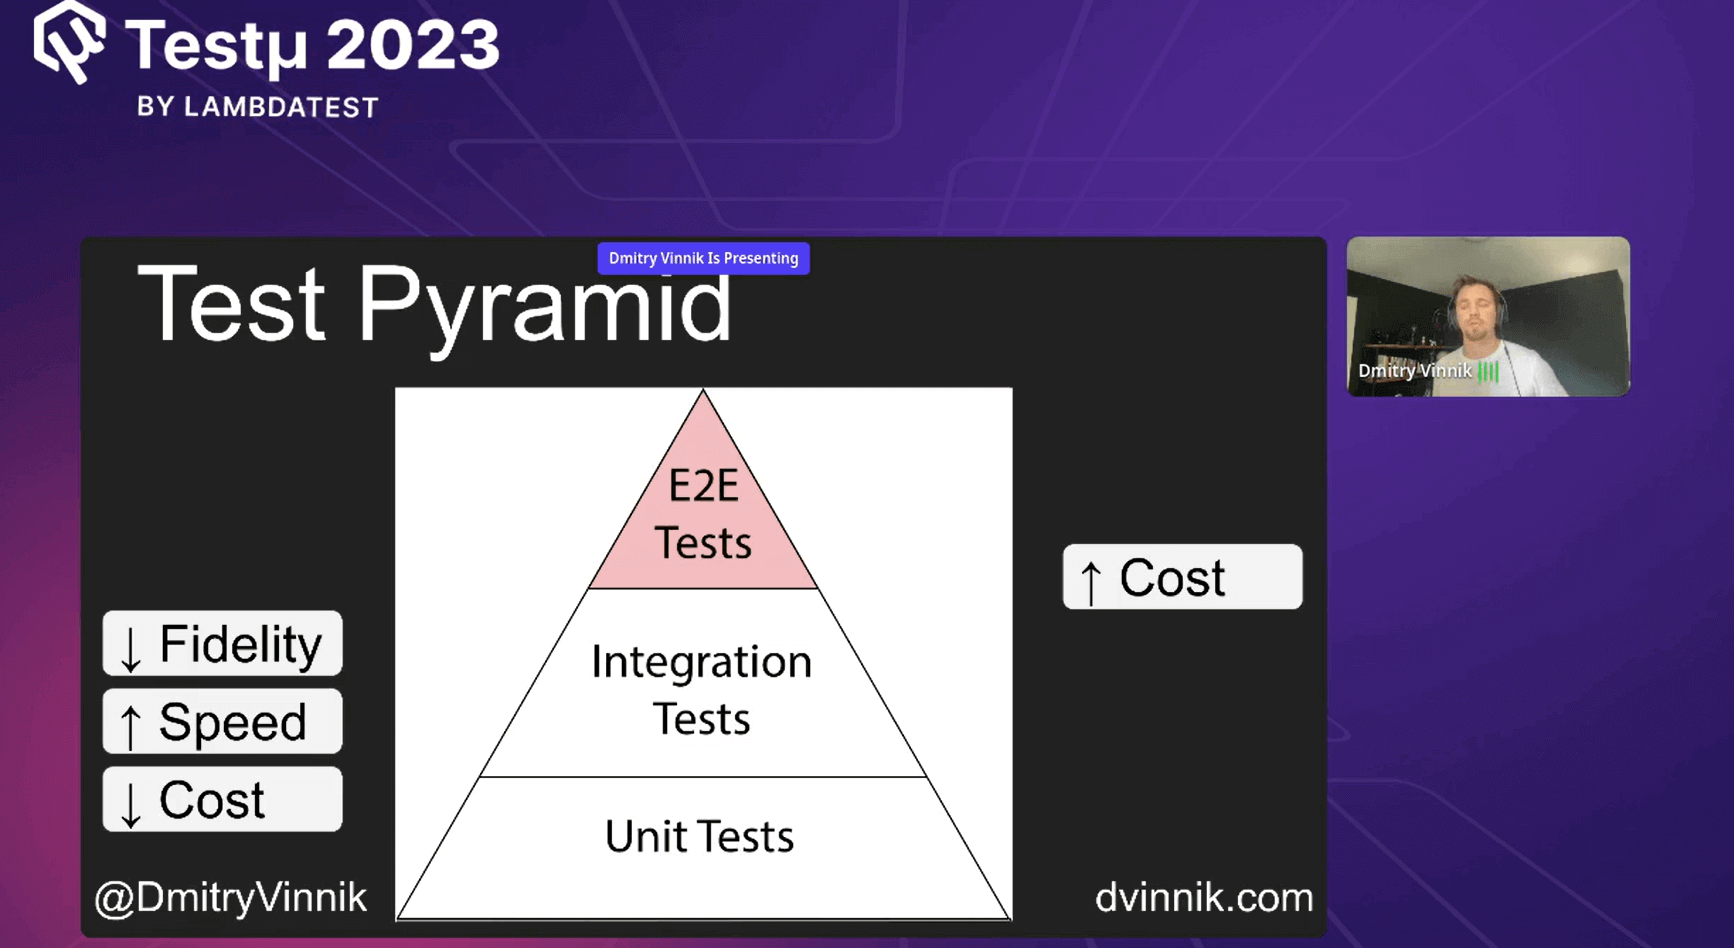 Role of Test Pyramid